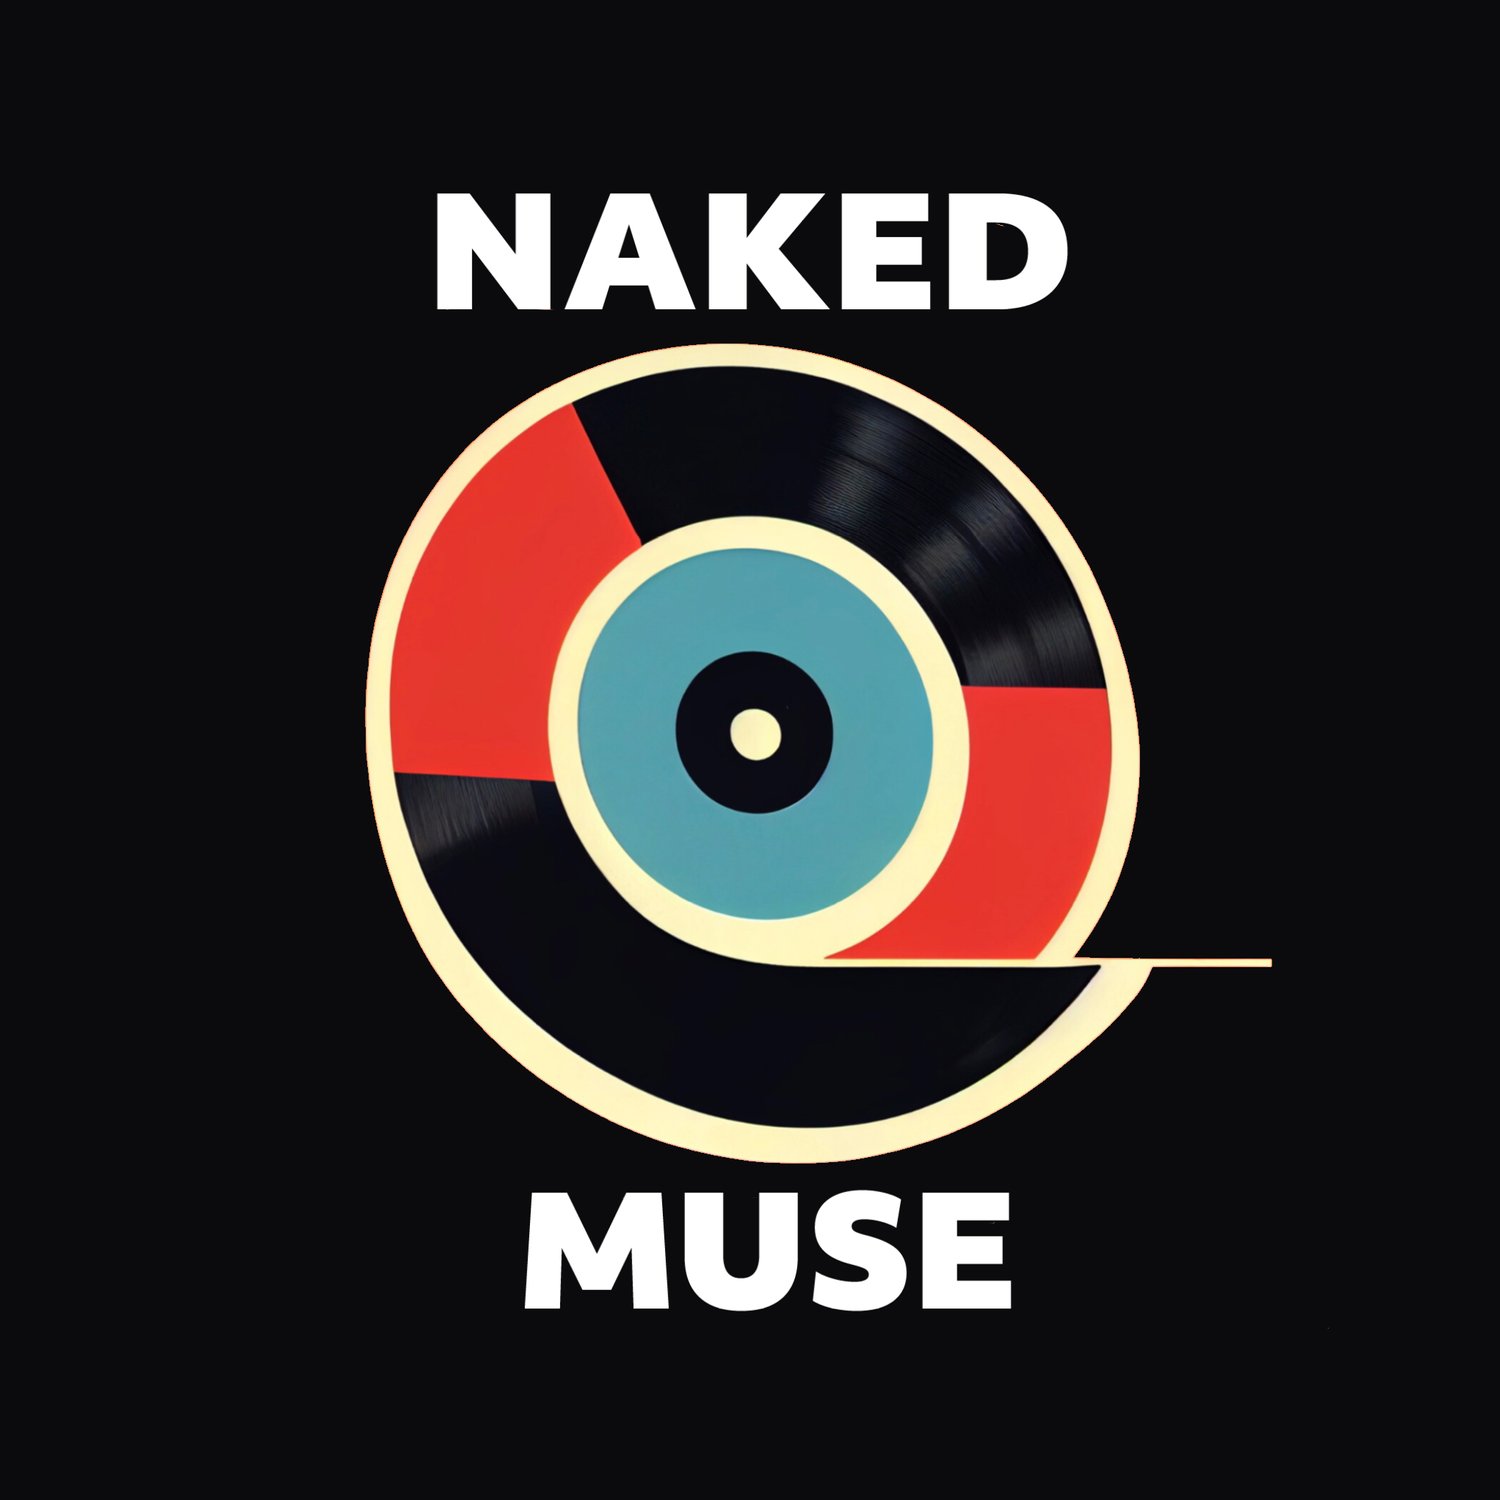 NAKED MUSE